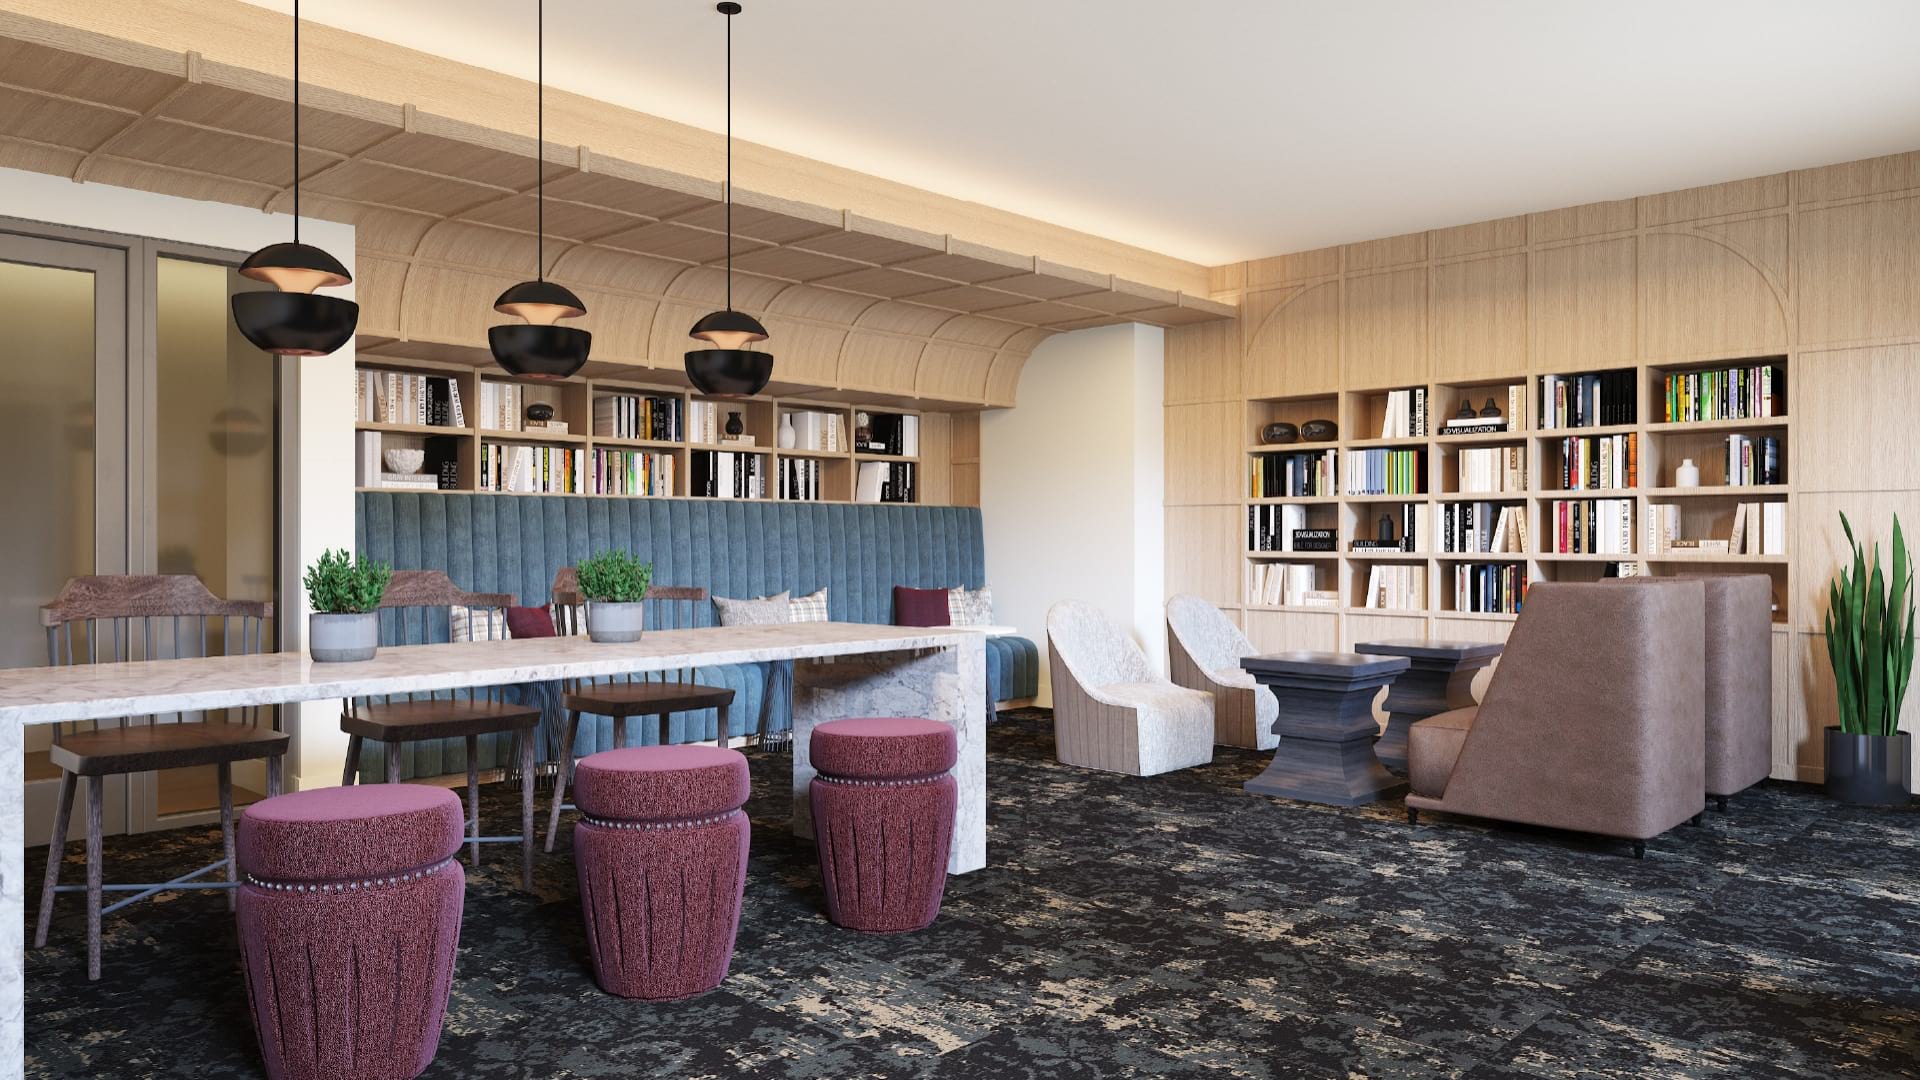 Library with large lounge area and natural lighting